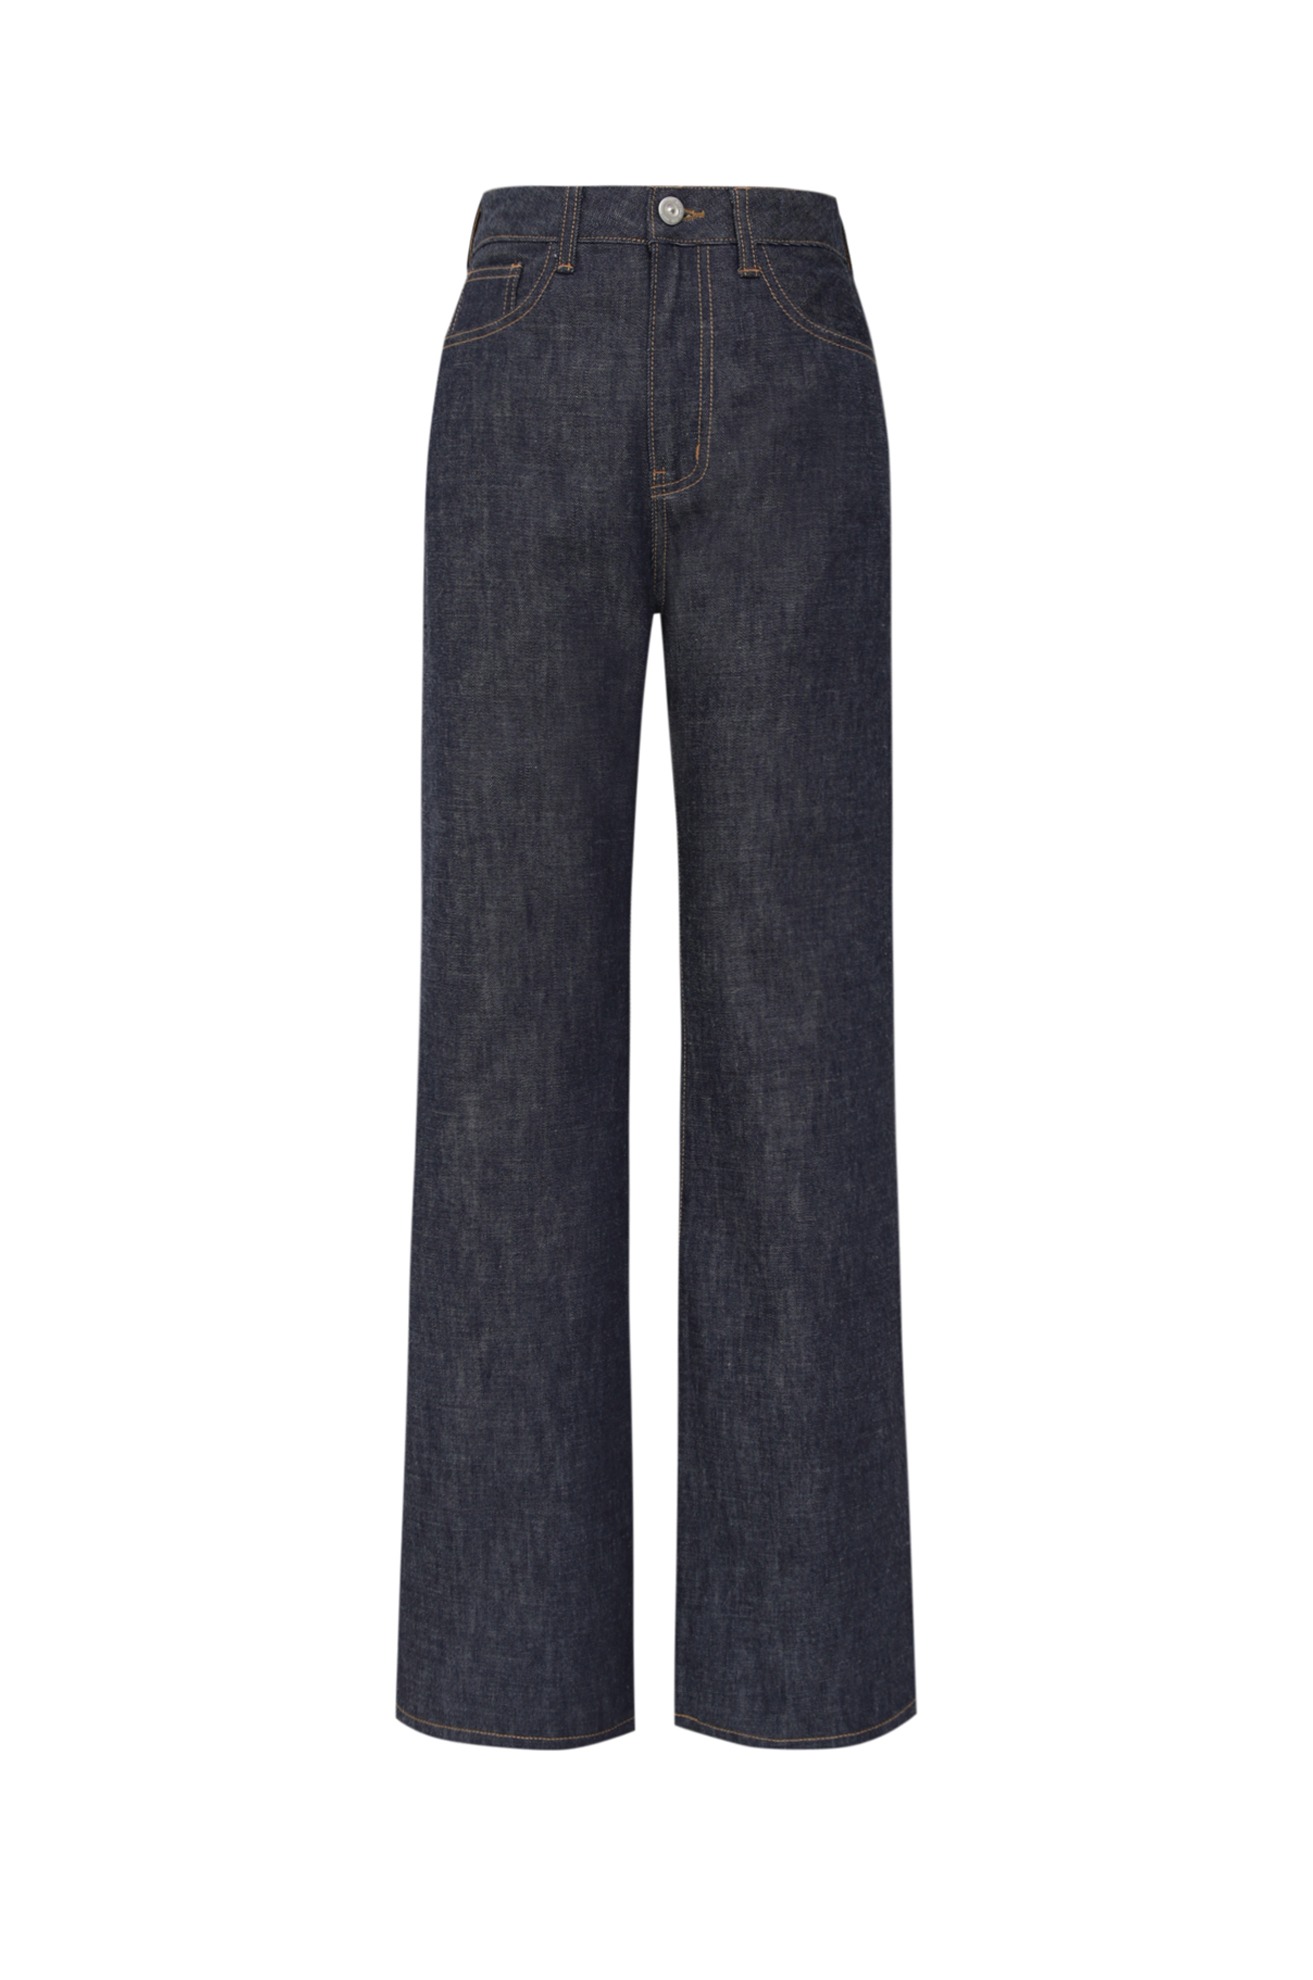 Japanese 13.5oz. Flared Cut Jeans <br><sub><mark><strong>ATELIER EDITION </strong></sub><br>